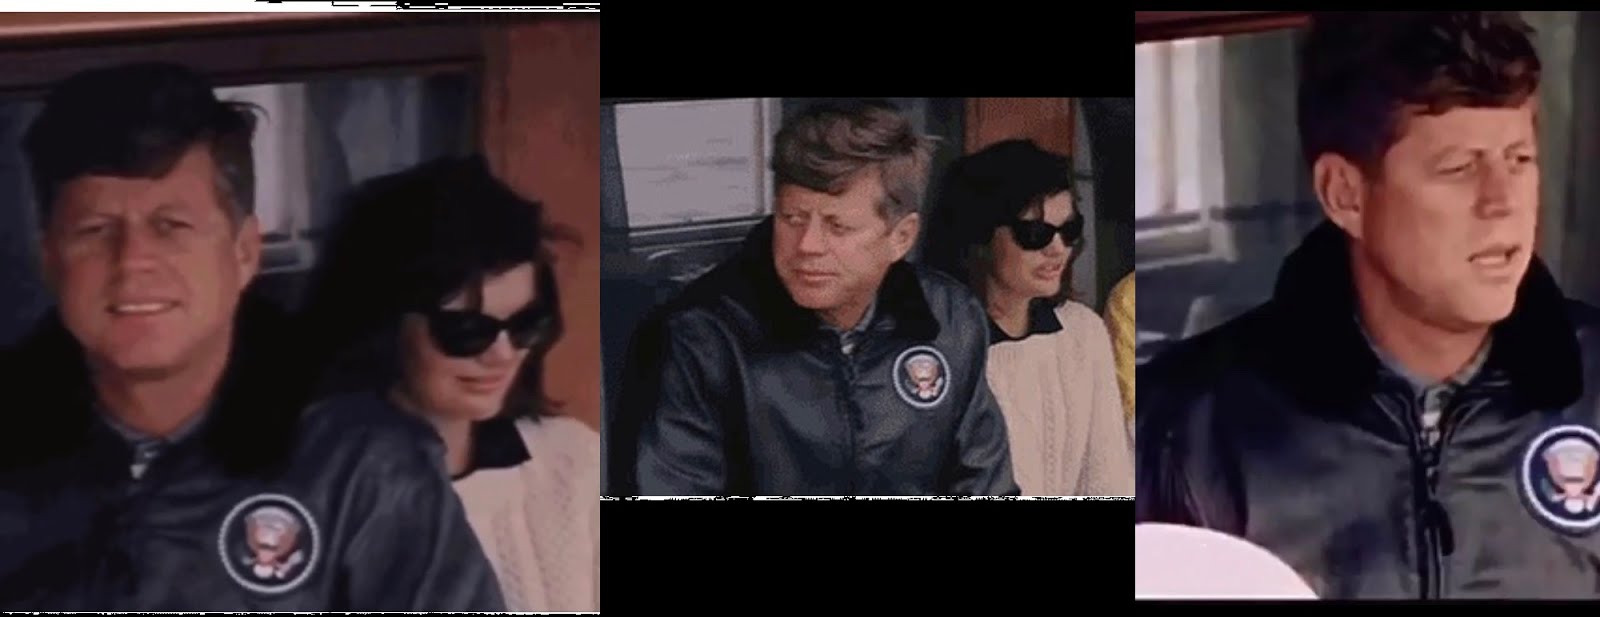 PRESIDENT KENNEDY AND JACKIE